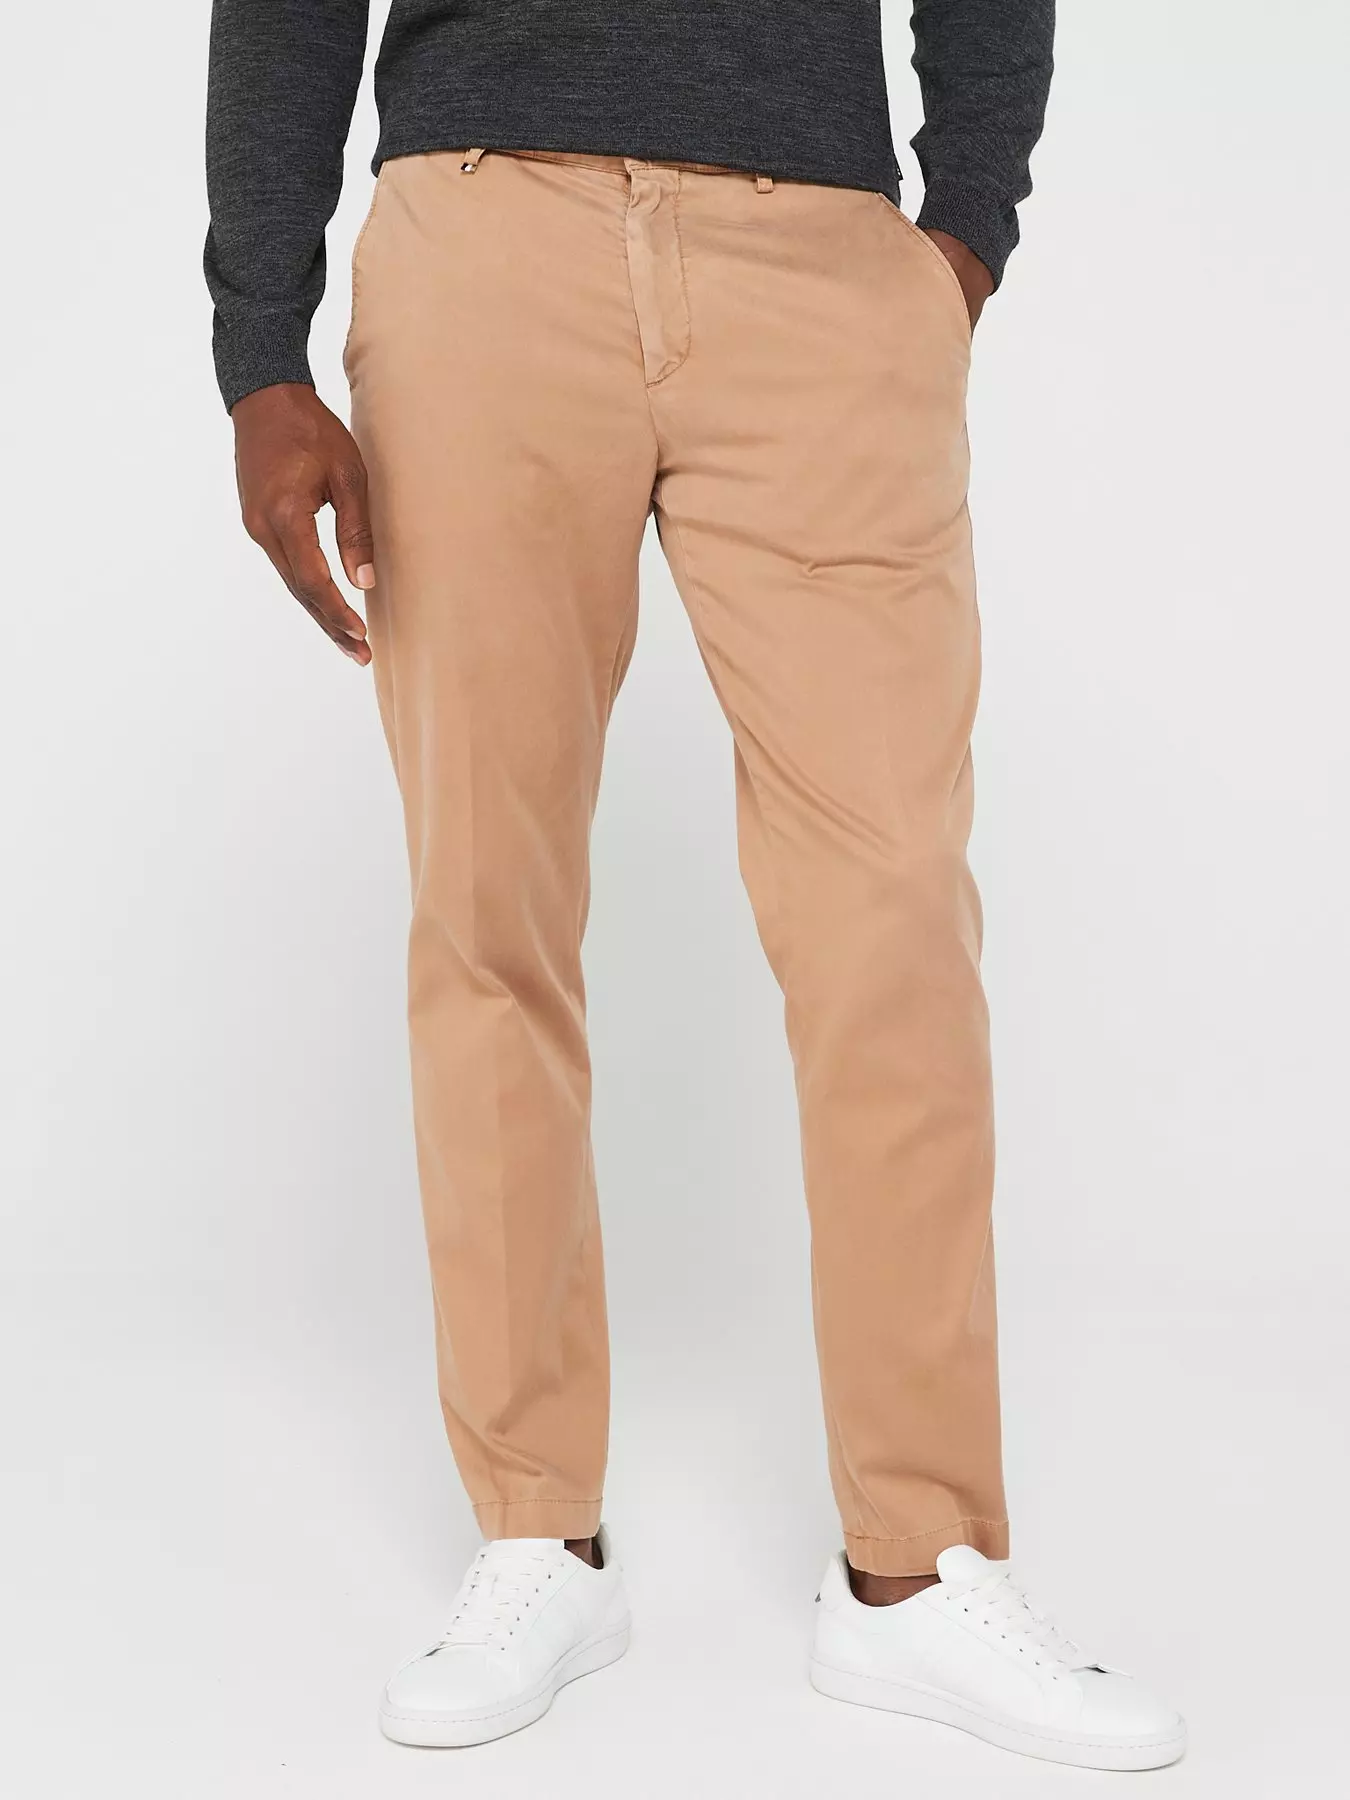 Seasonal Taped Track Pants - Black / Whisky Brown, Men's Trousers, Chinos, Joggers & Casual Trousers